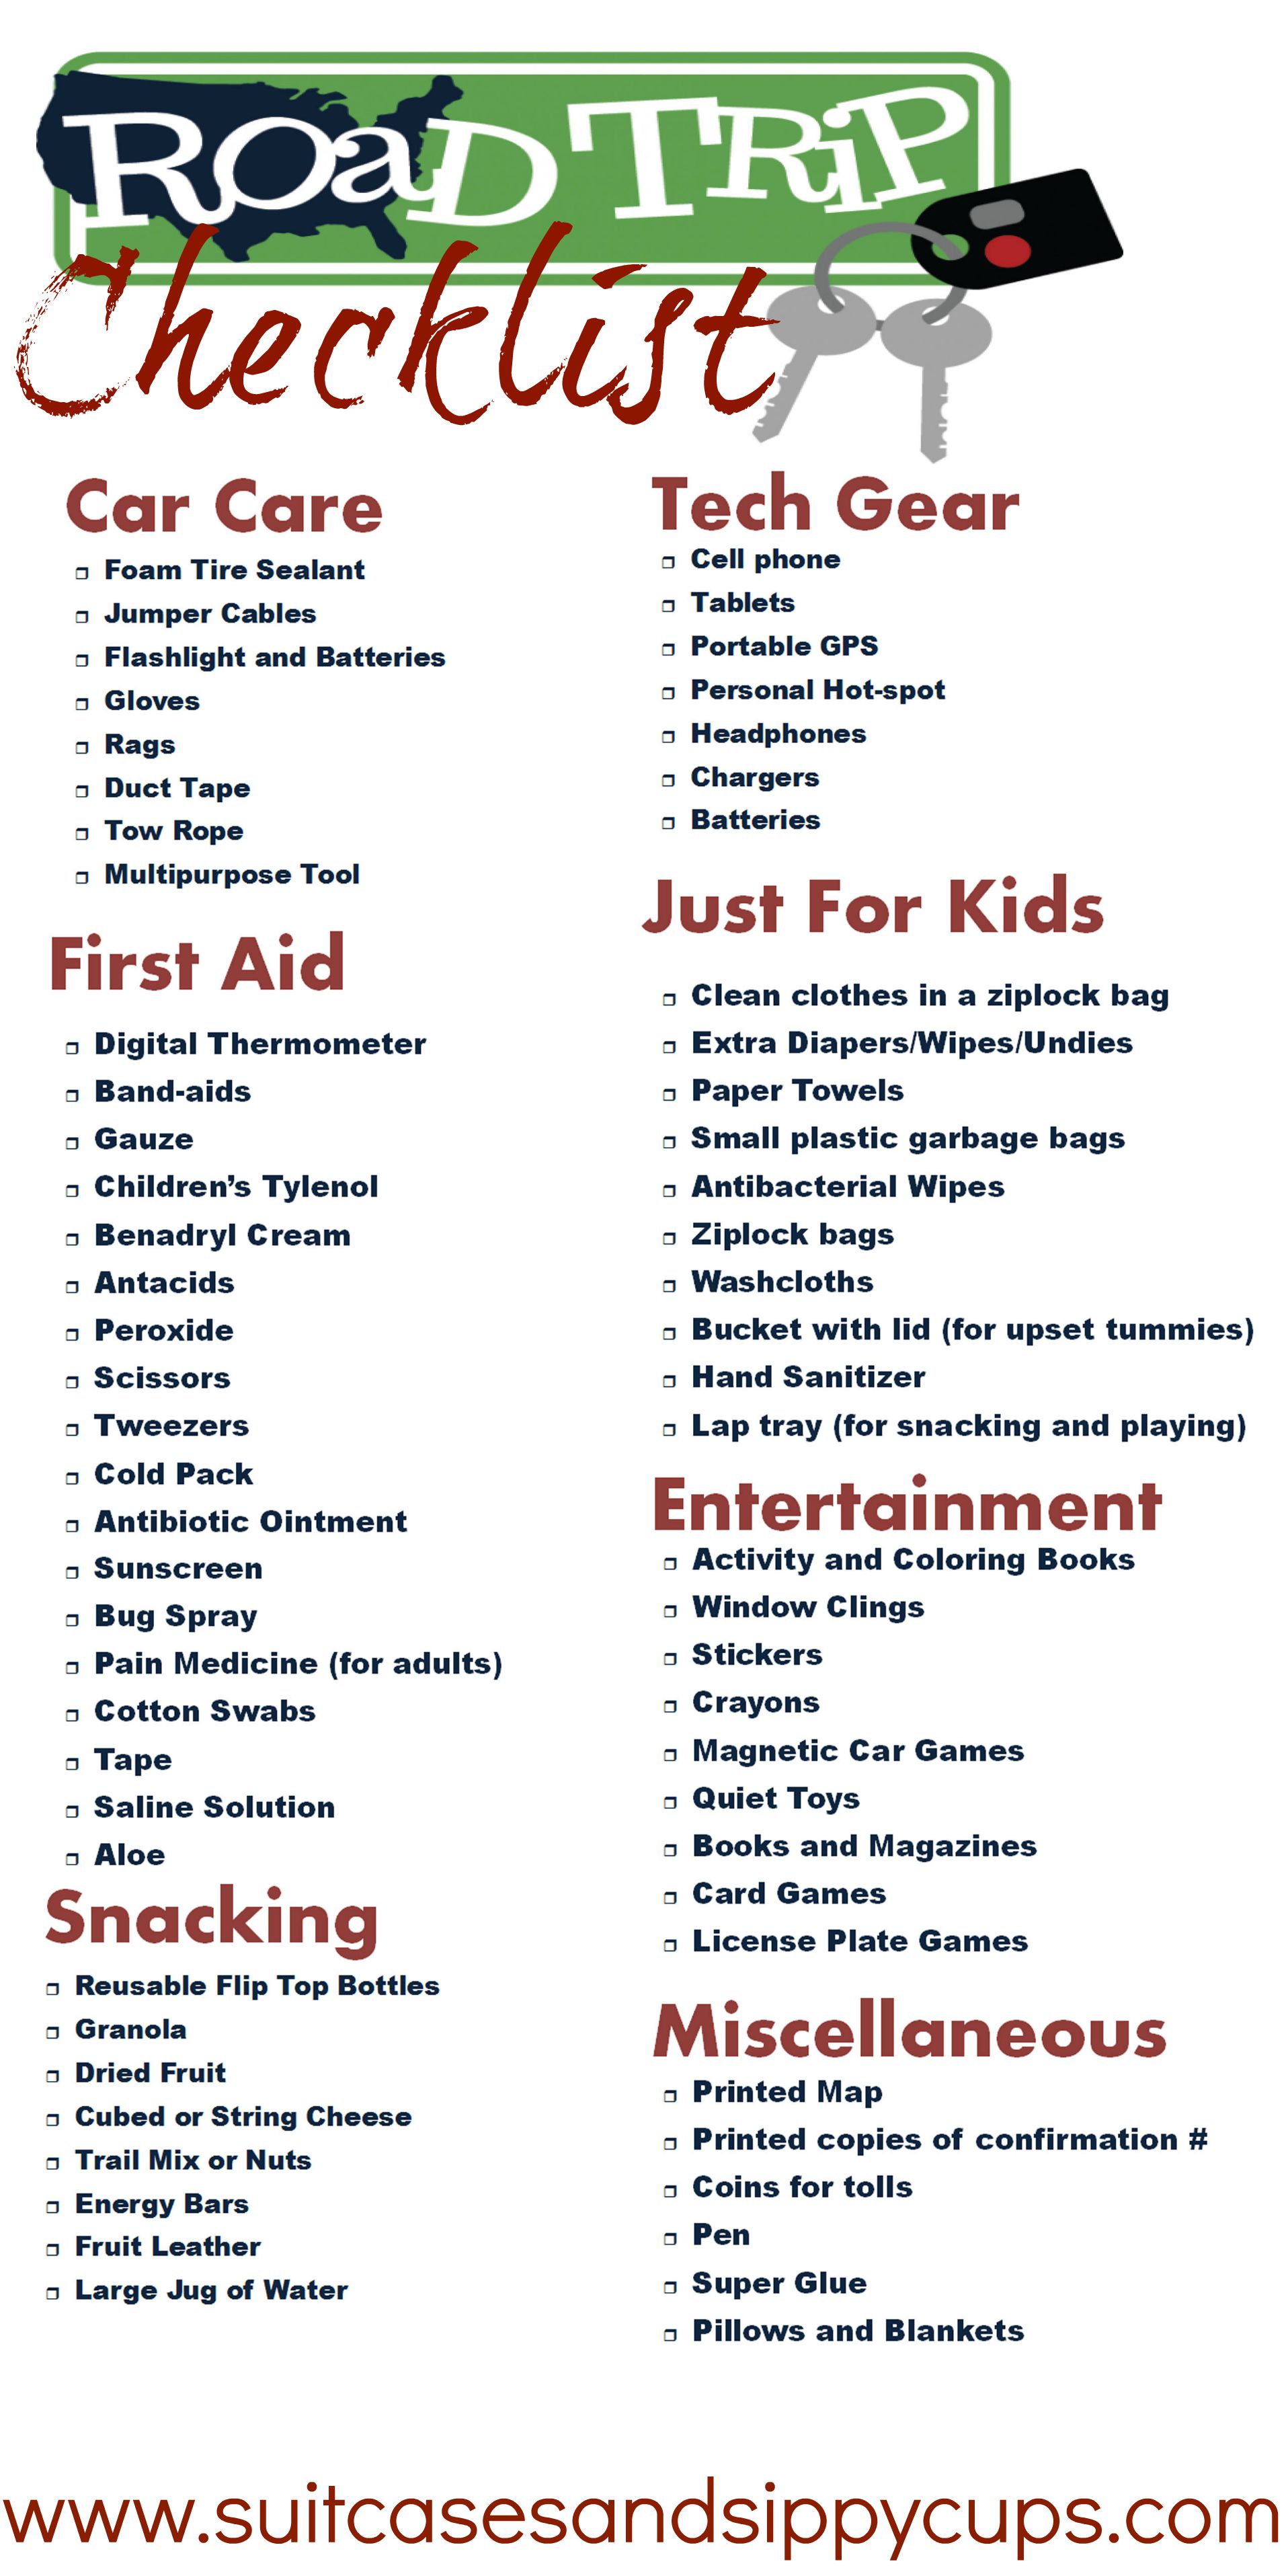 Road trip essentials for kids: packing list + advice on how to